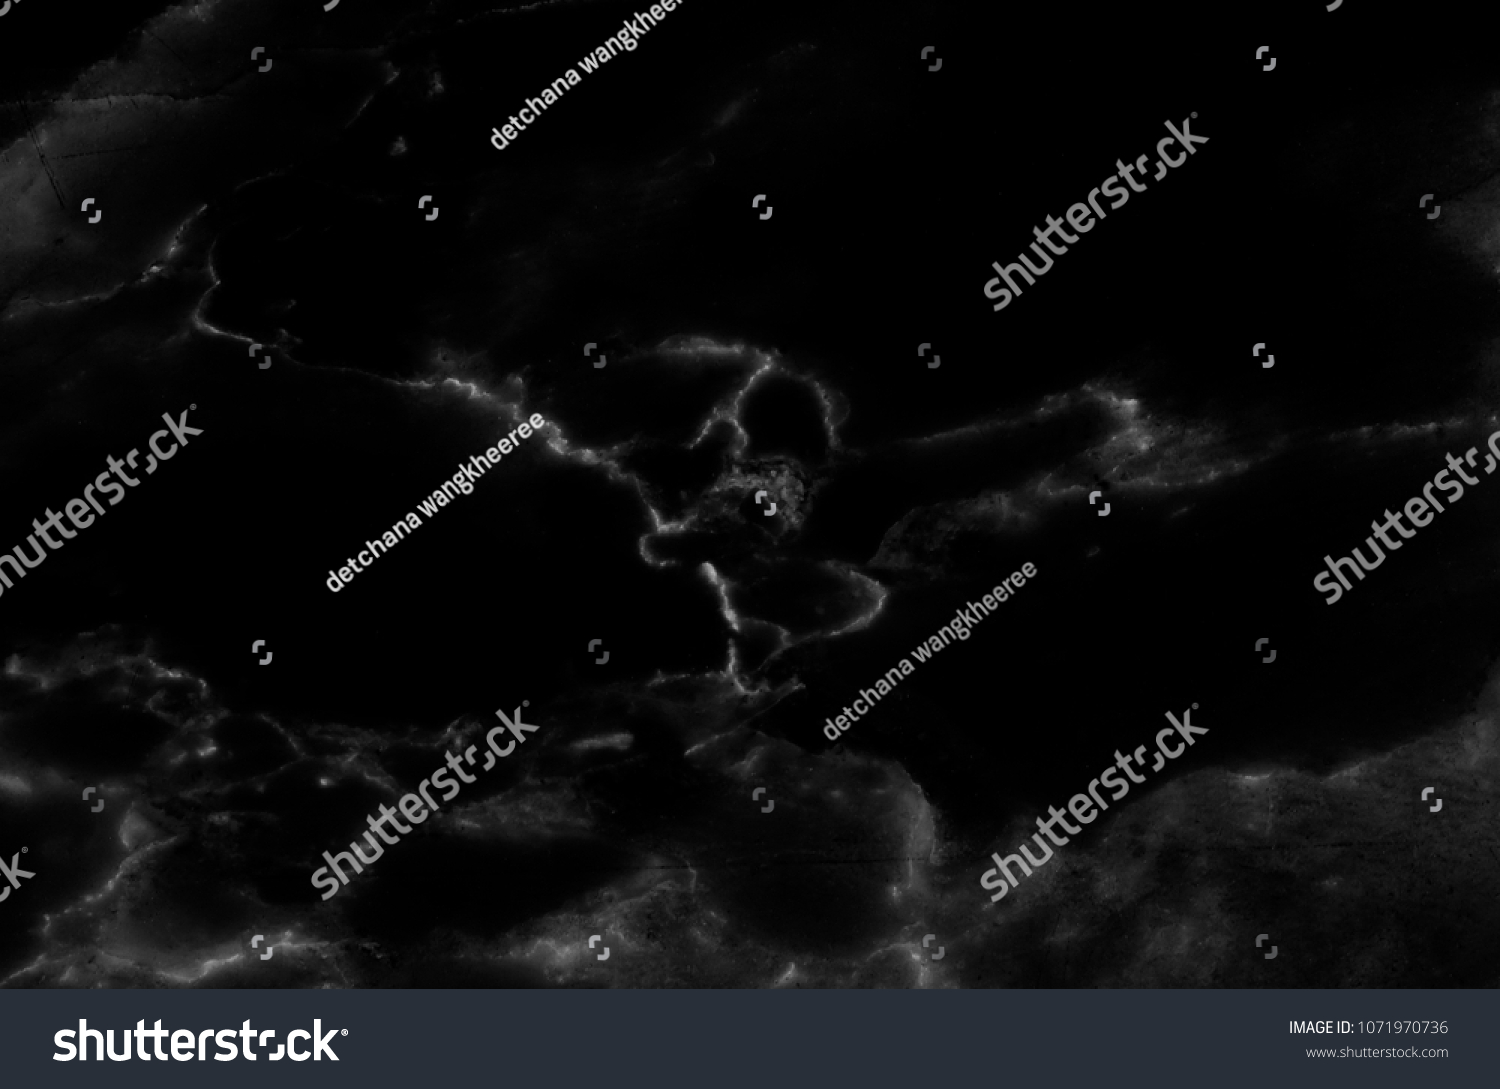 Black Marble Stone Texture Abstract Background Stock Photo 1071970736 ...